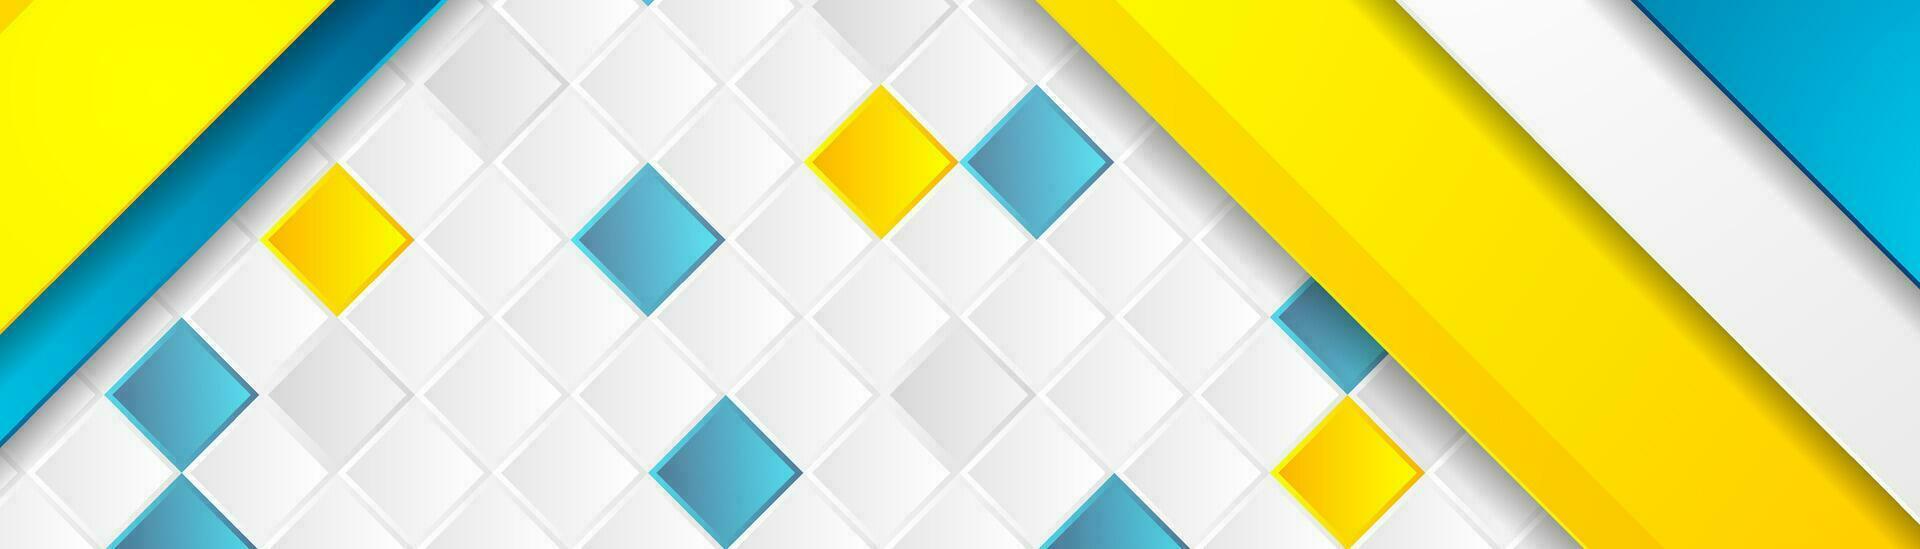 Abstract geometric corporate background with squares mosaic vector